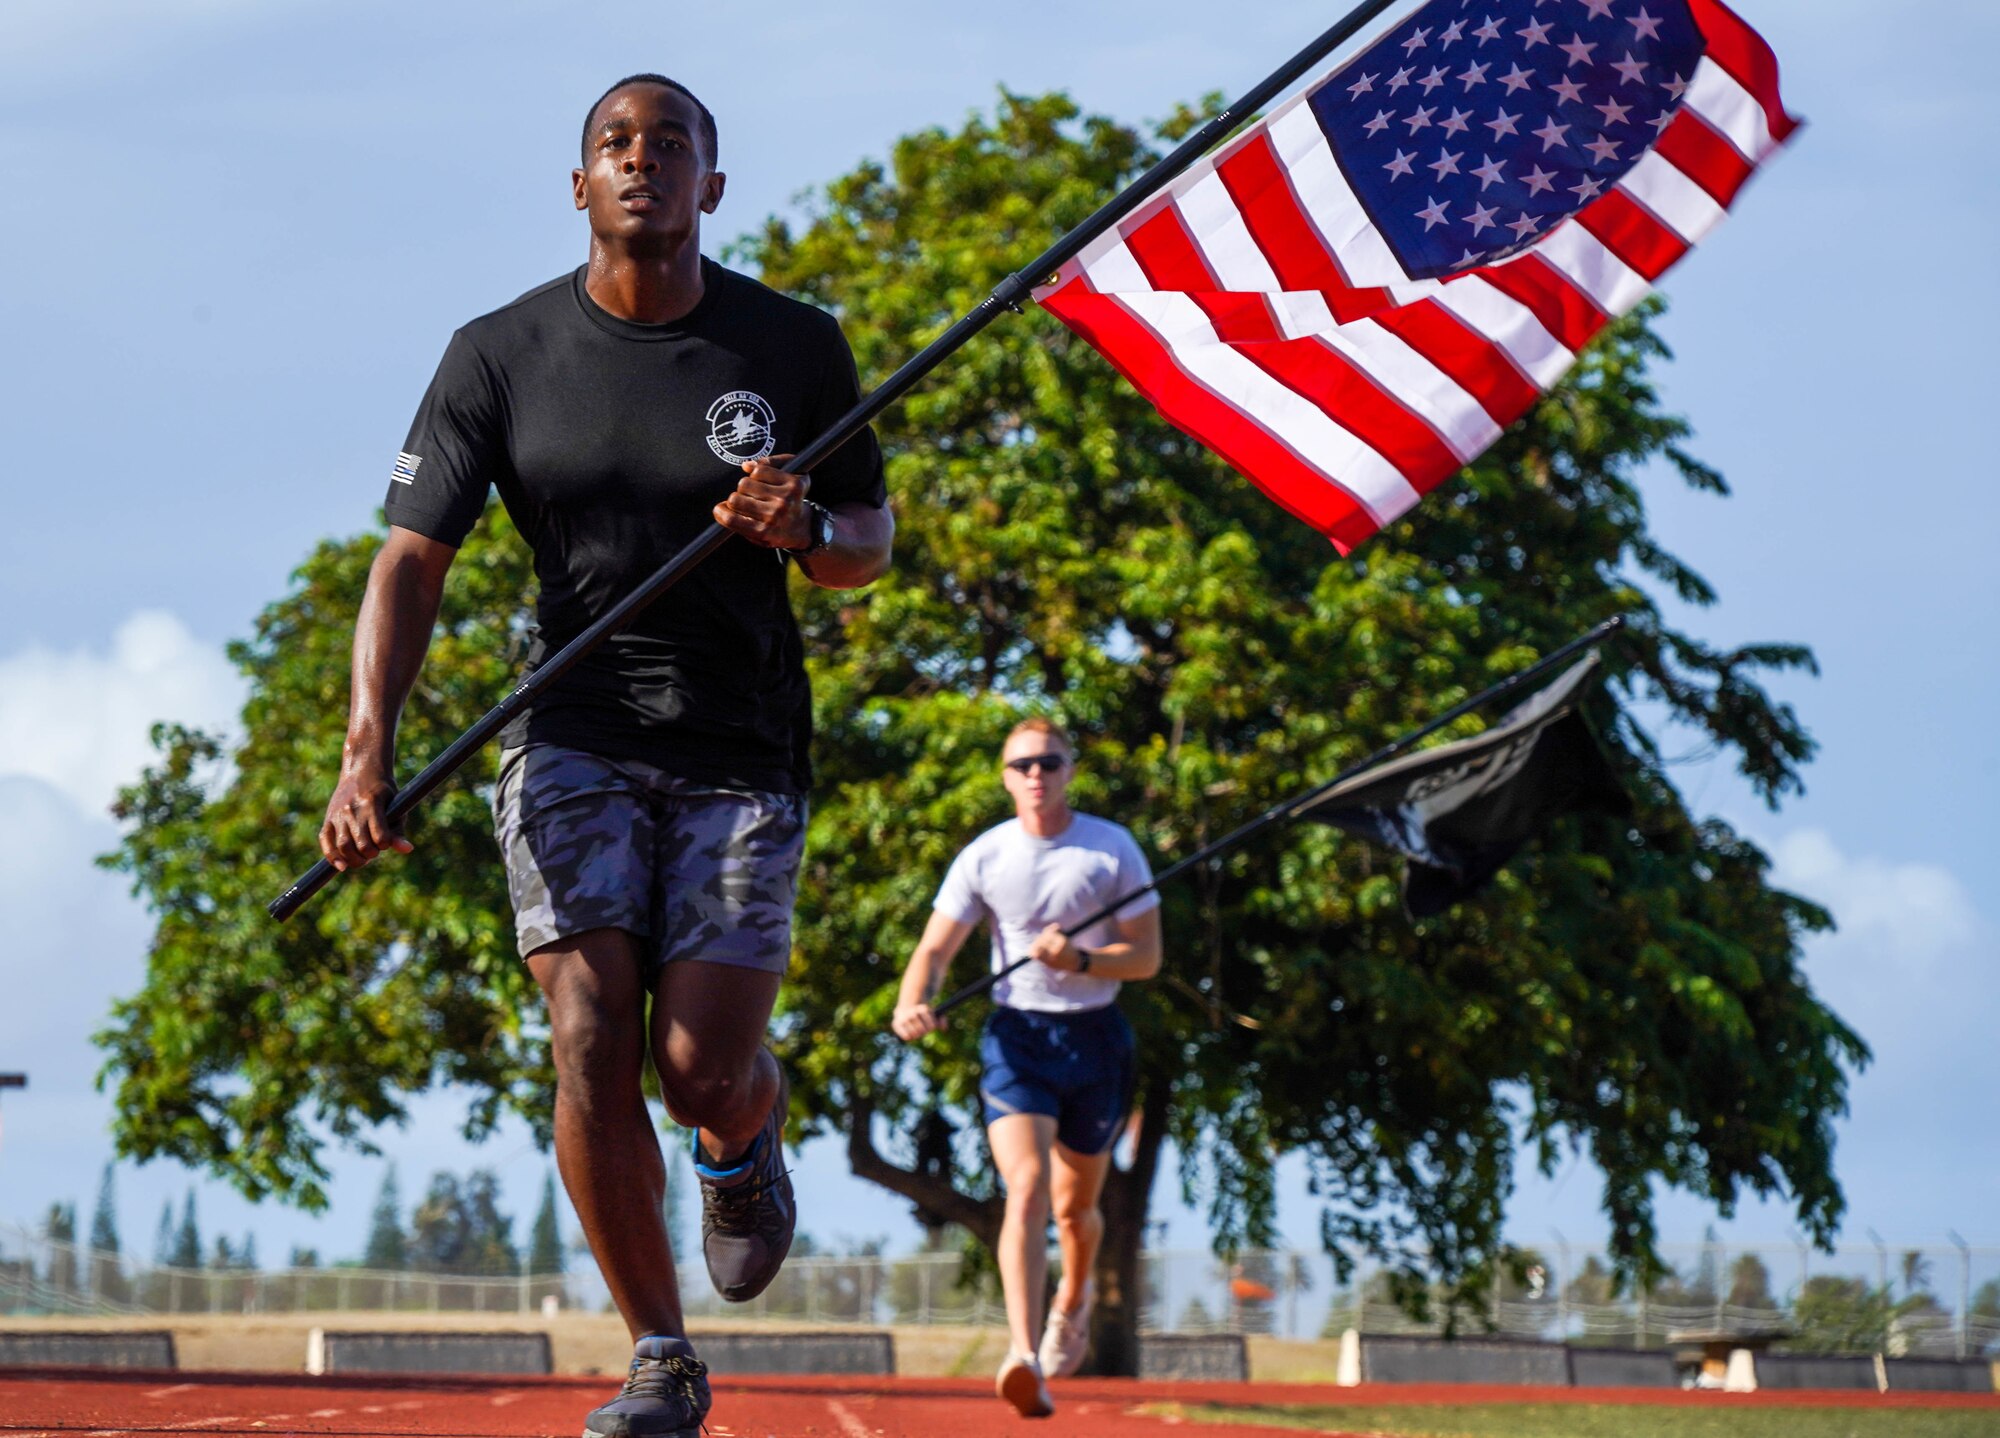 Airman 1st Class Jordan Nettles, 647th Civil Engineer Squadron water and fuels maintenance craftsman, participates in a 24-hour run in honor of Prisoners of War and Missing in Action remembrance week at Joint Base Pearl Harbor-Hickam, Hawaii, Sept. 16, 2021. During the run, the POW/MIA flag will stay in motion for 24 hours by volunteers running with the flag to commemorate and symbolize the unwavering pursuit to recover all service members past and present. (U.S. Air Force photo by Airman 1st Class Makensie Cooper)